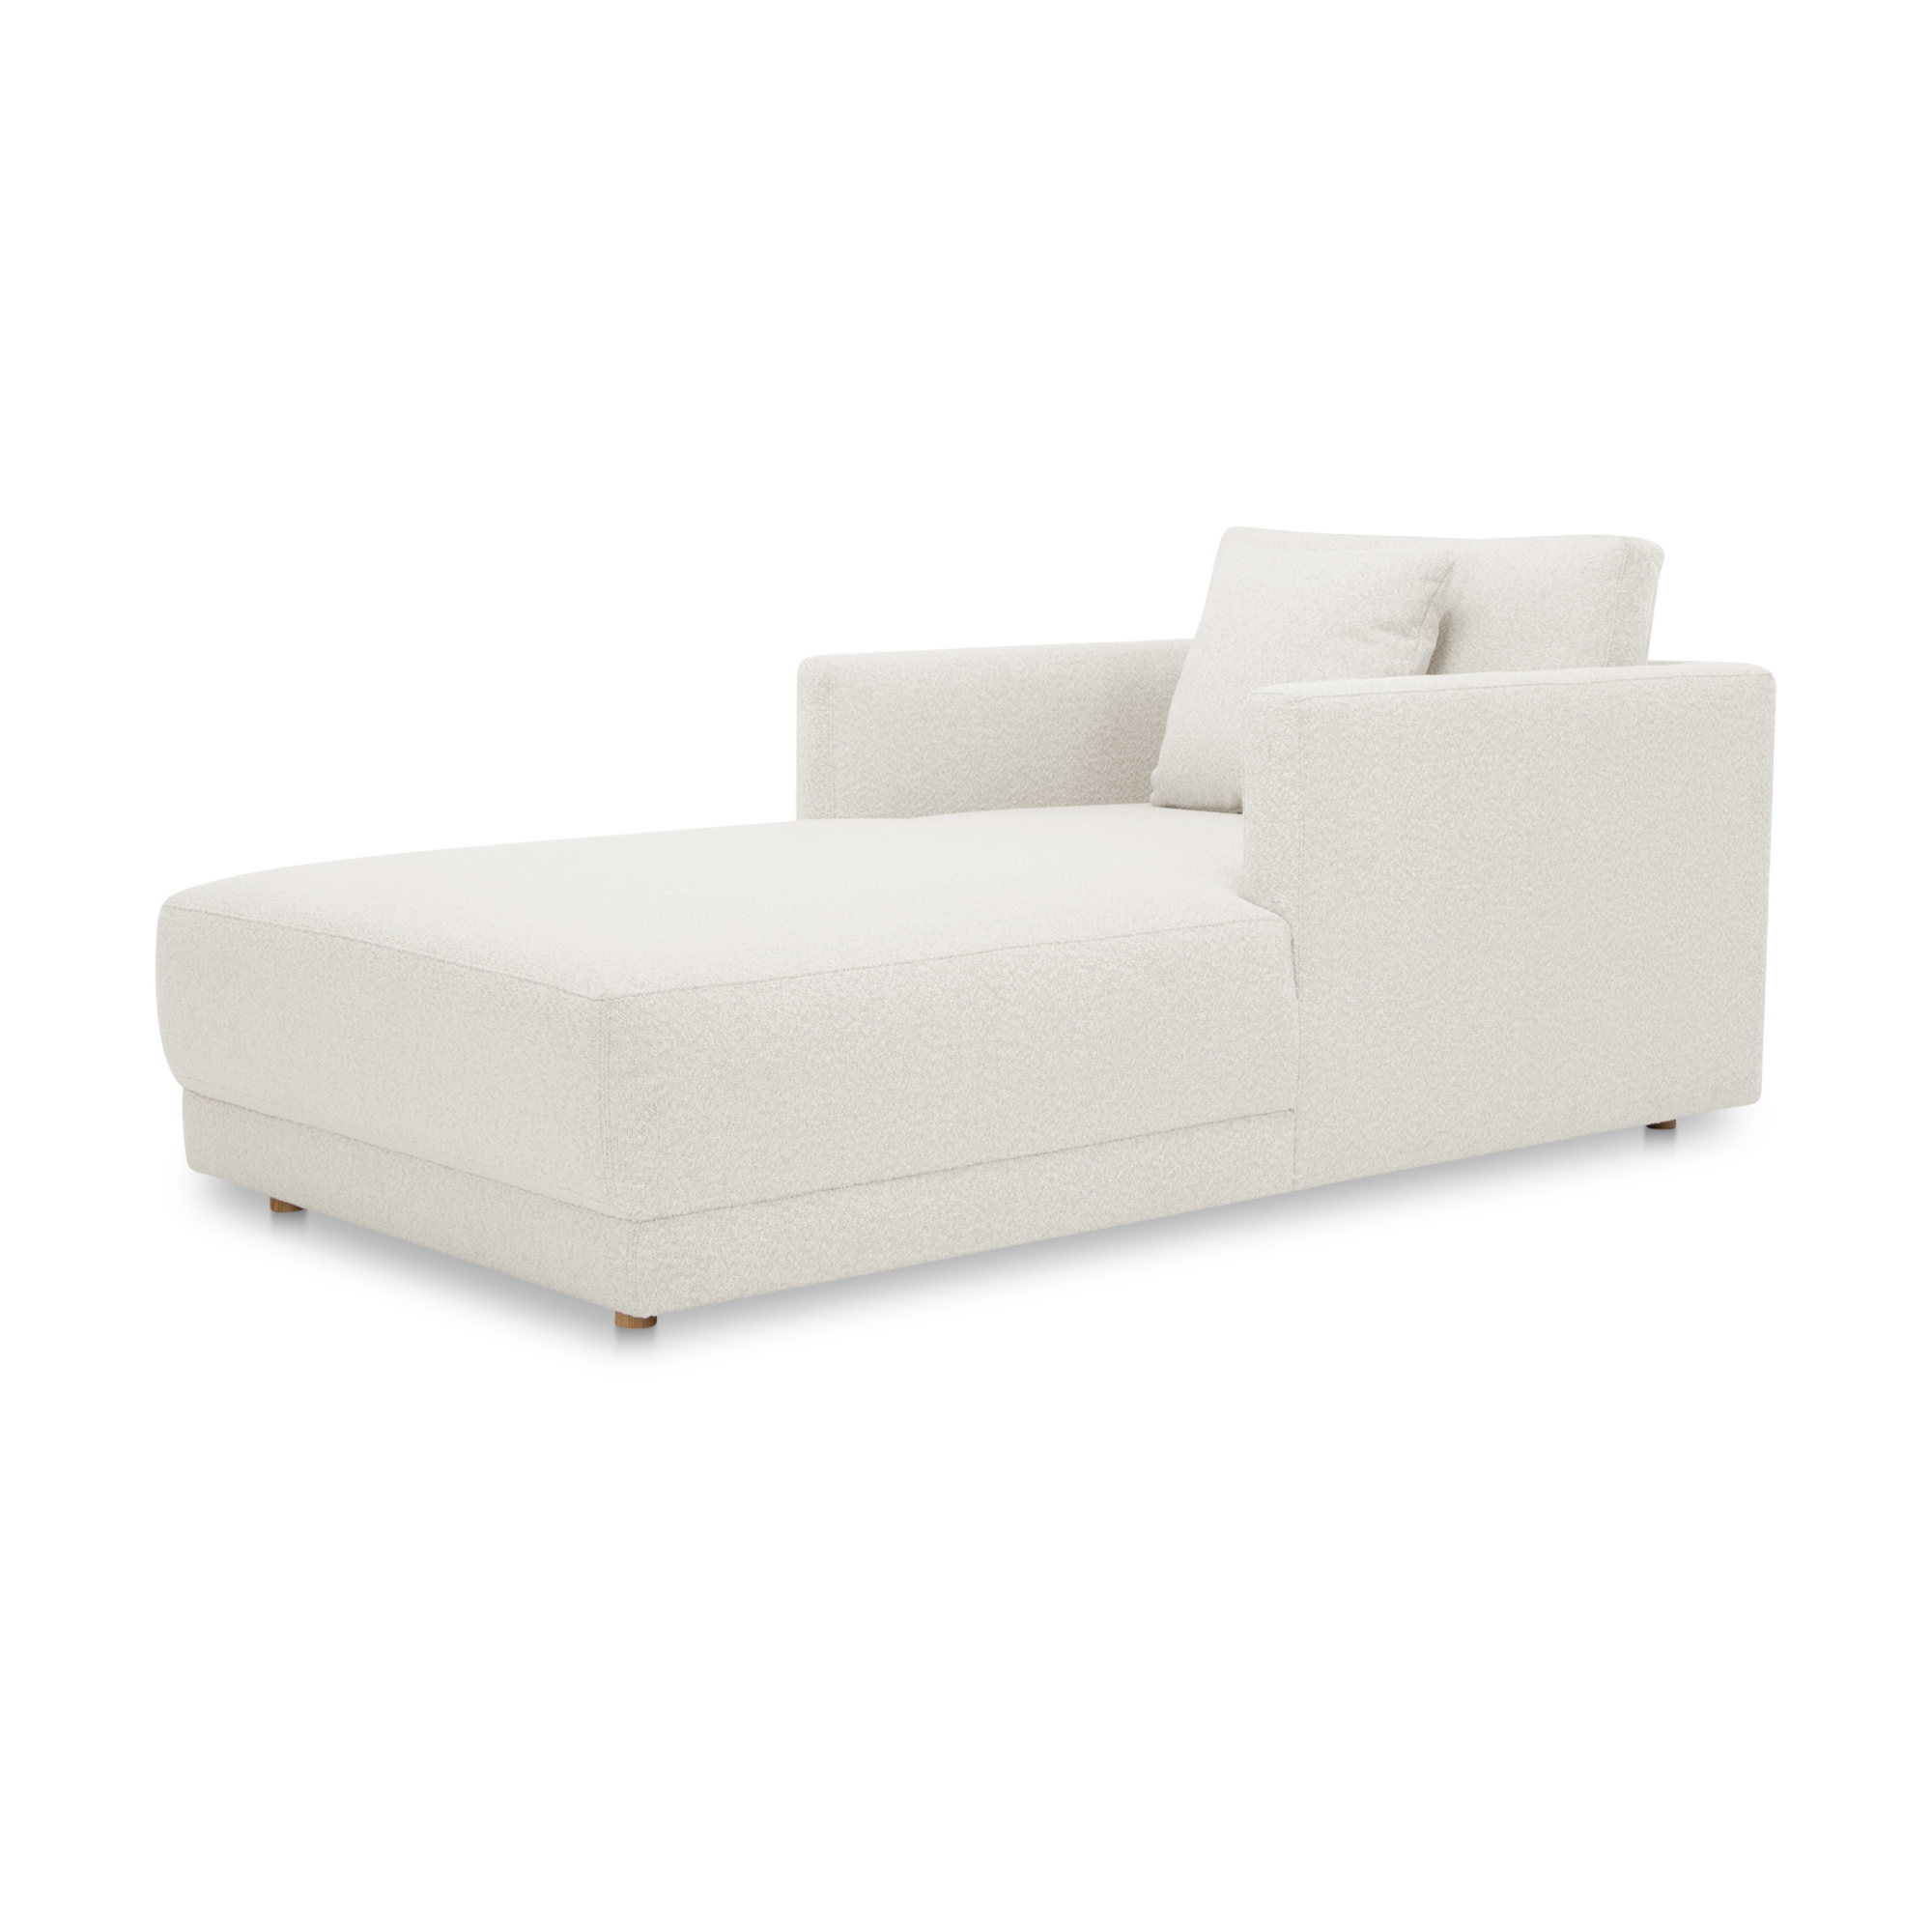 Downey Chaise